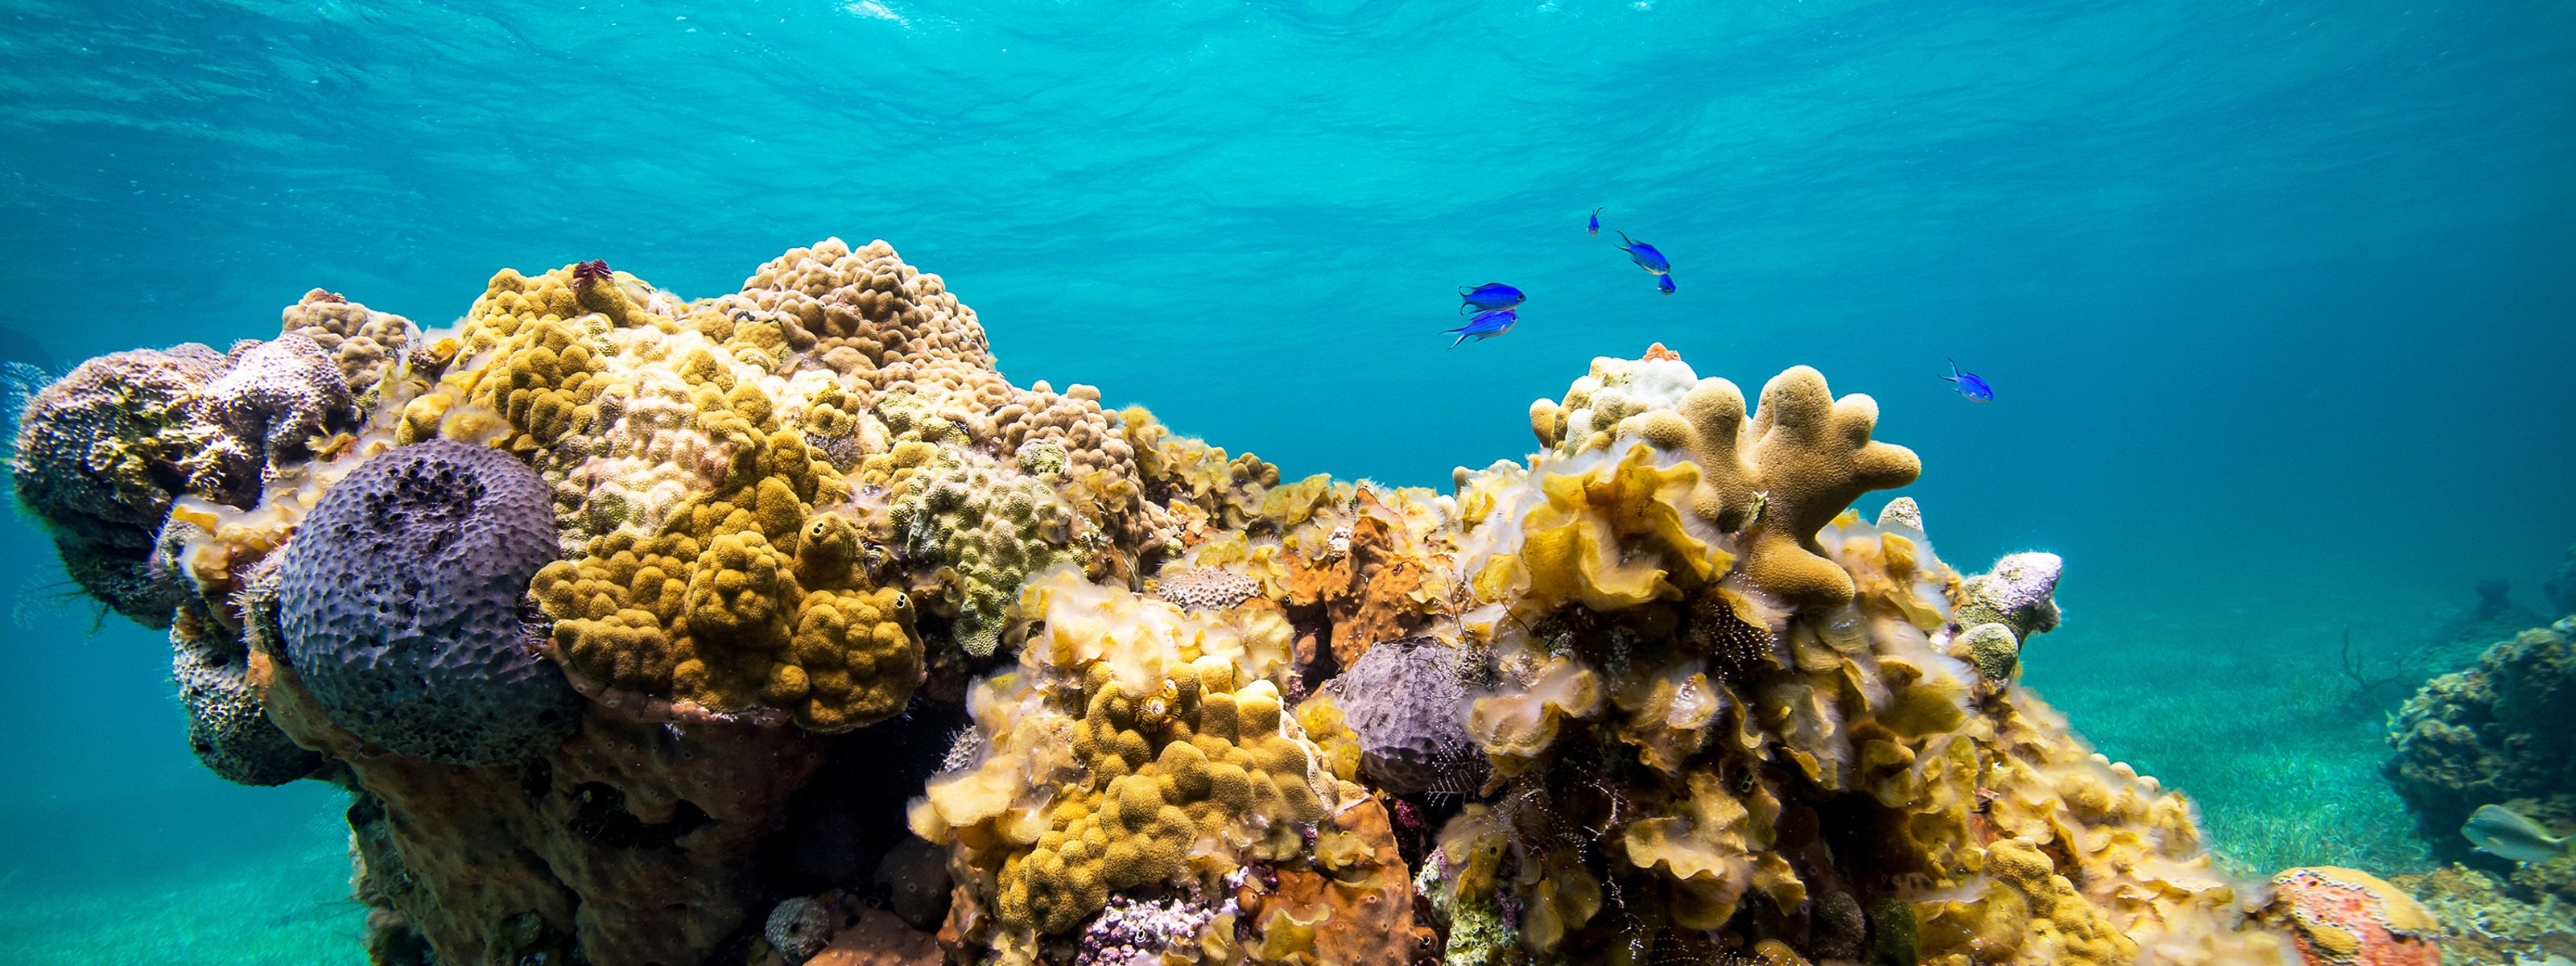 Healthy coral reefs in the Caribbean water.